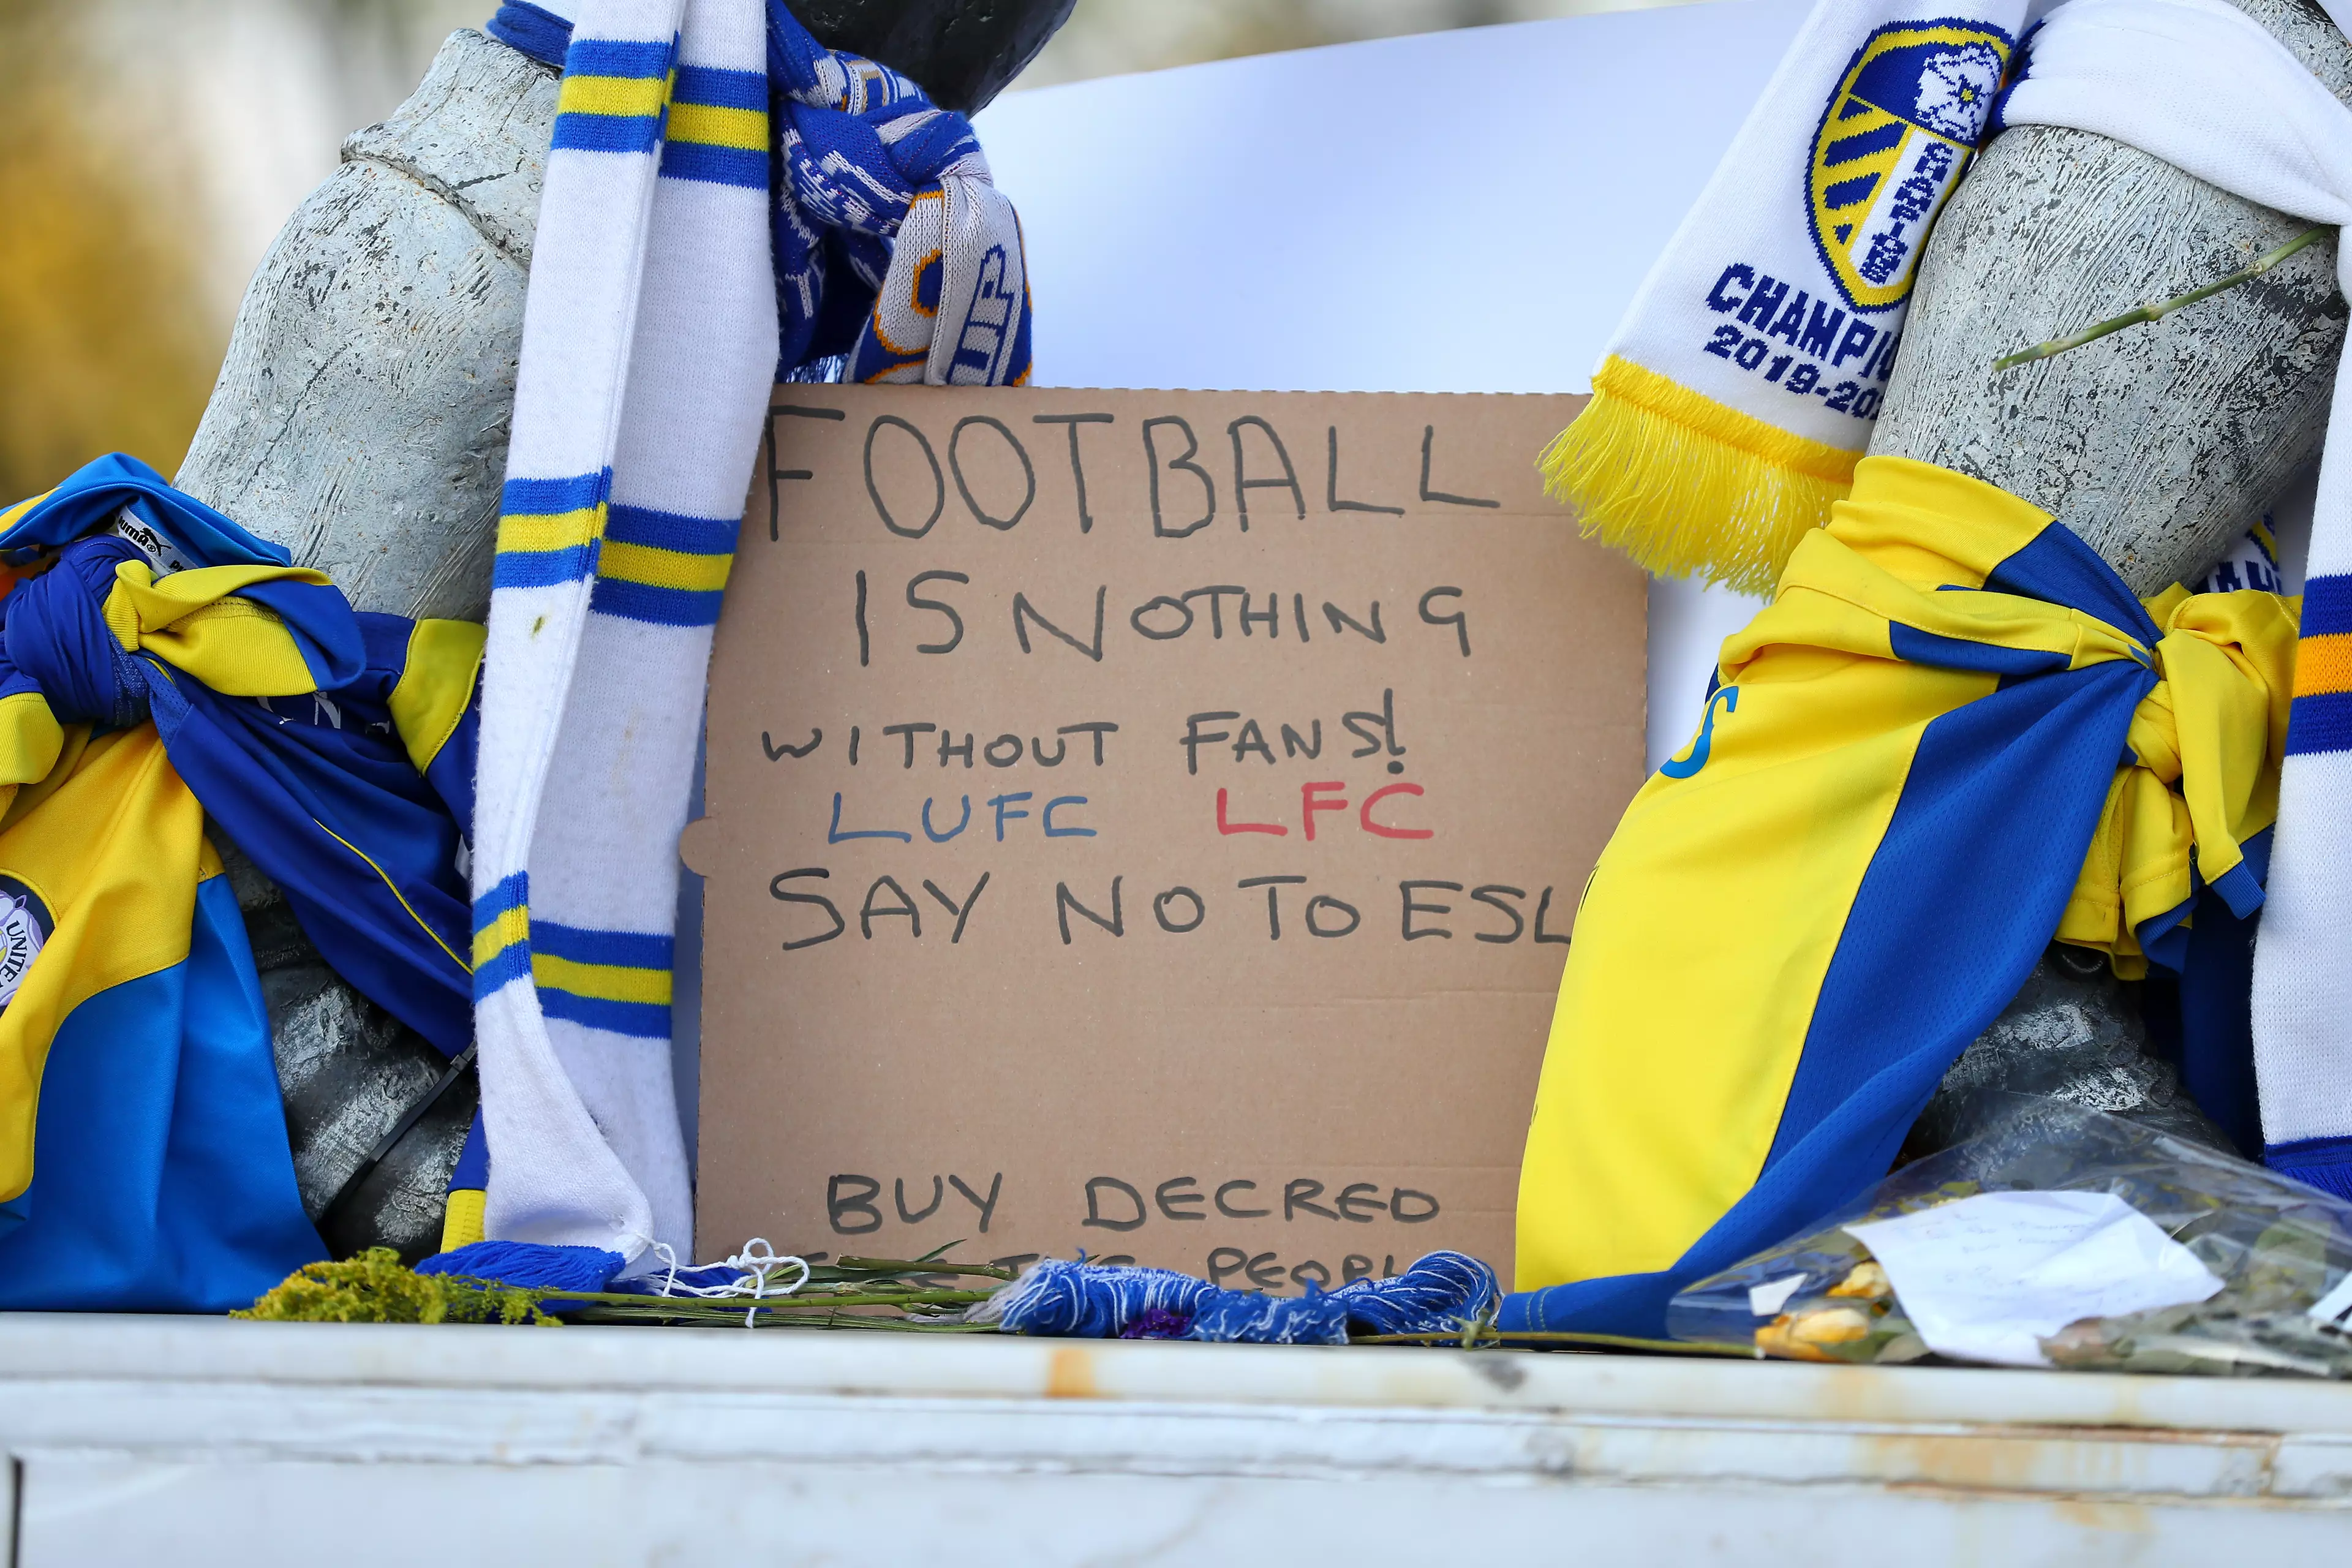 Fans protested outside Elland Road ahead of the game. Image: PA Images